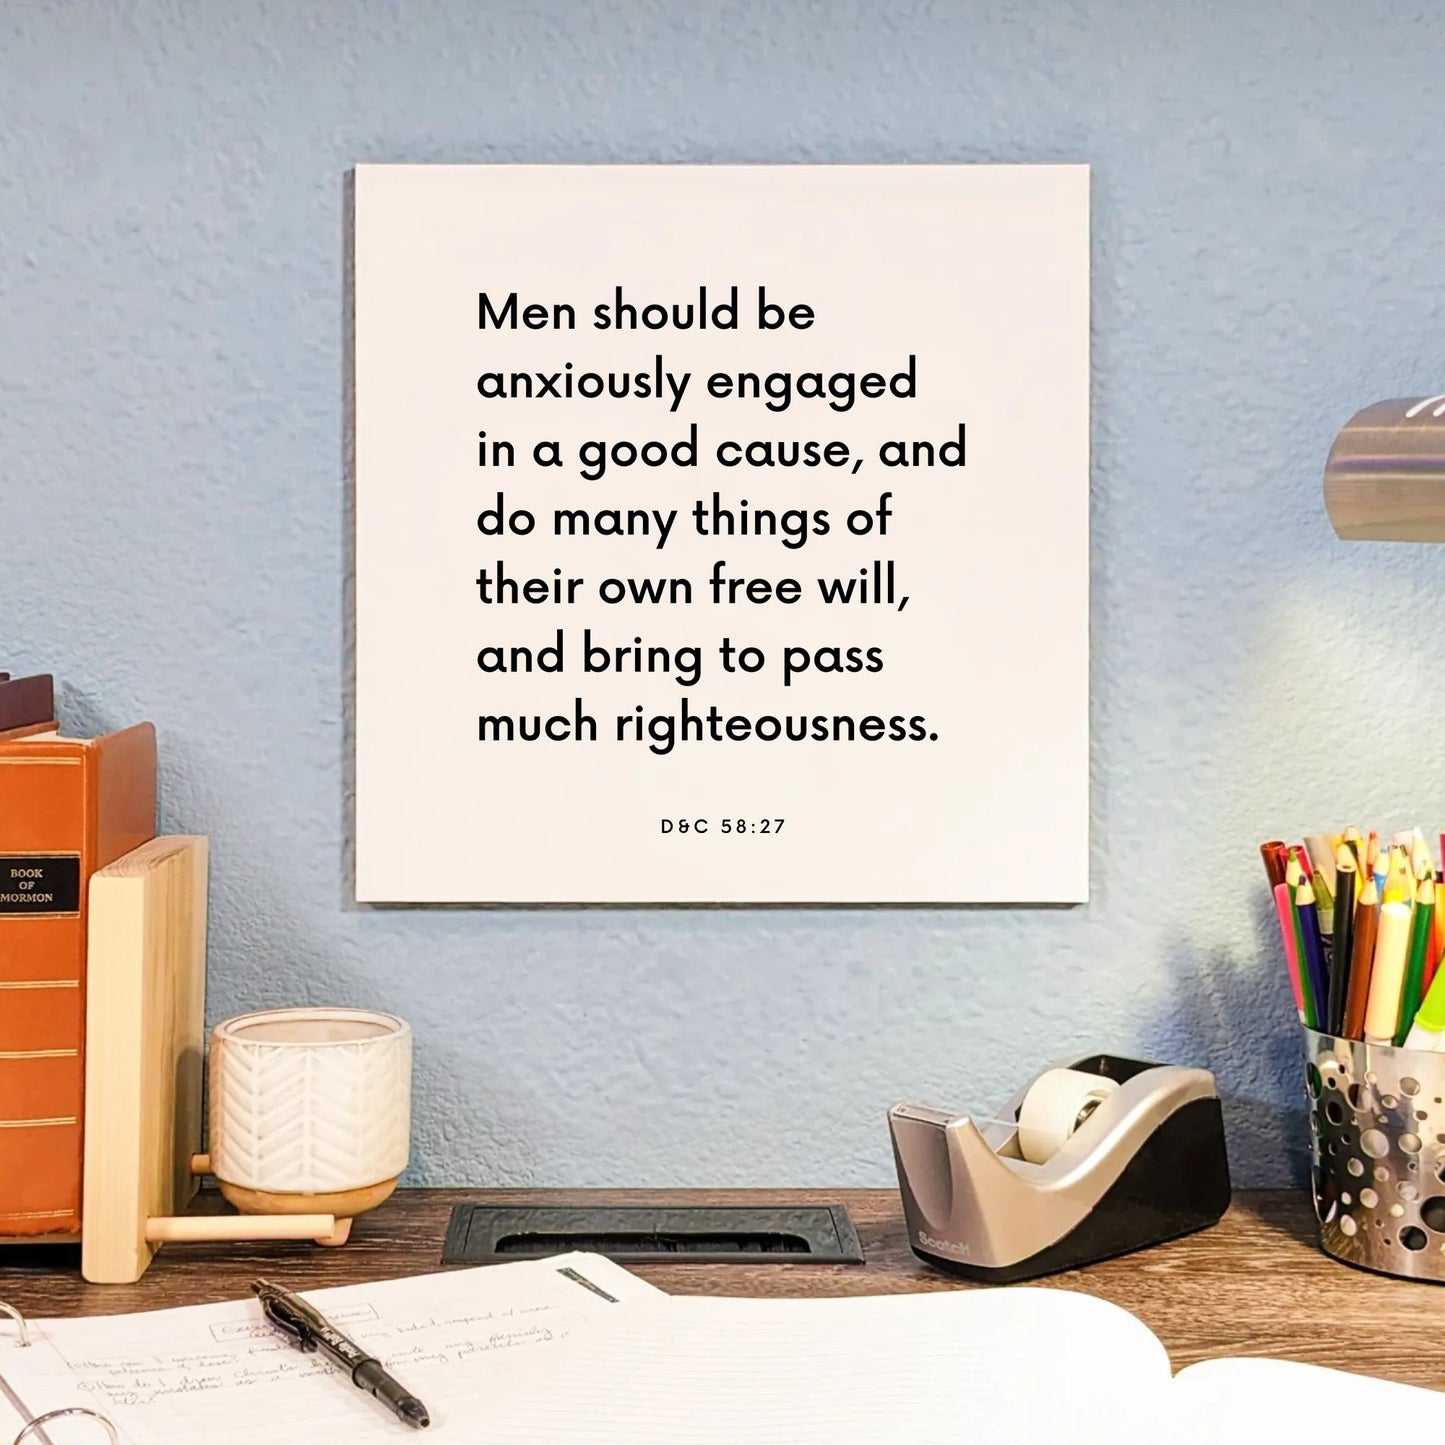 Desk mouting of the scripture tile for D&C 58:27 - "Men should be anxiously engaged in a good cause"